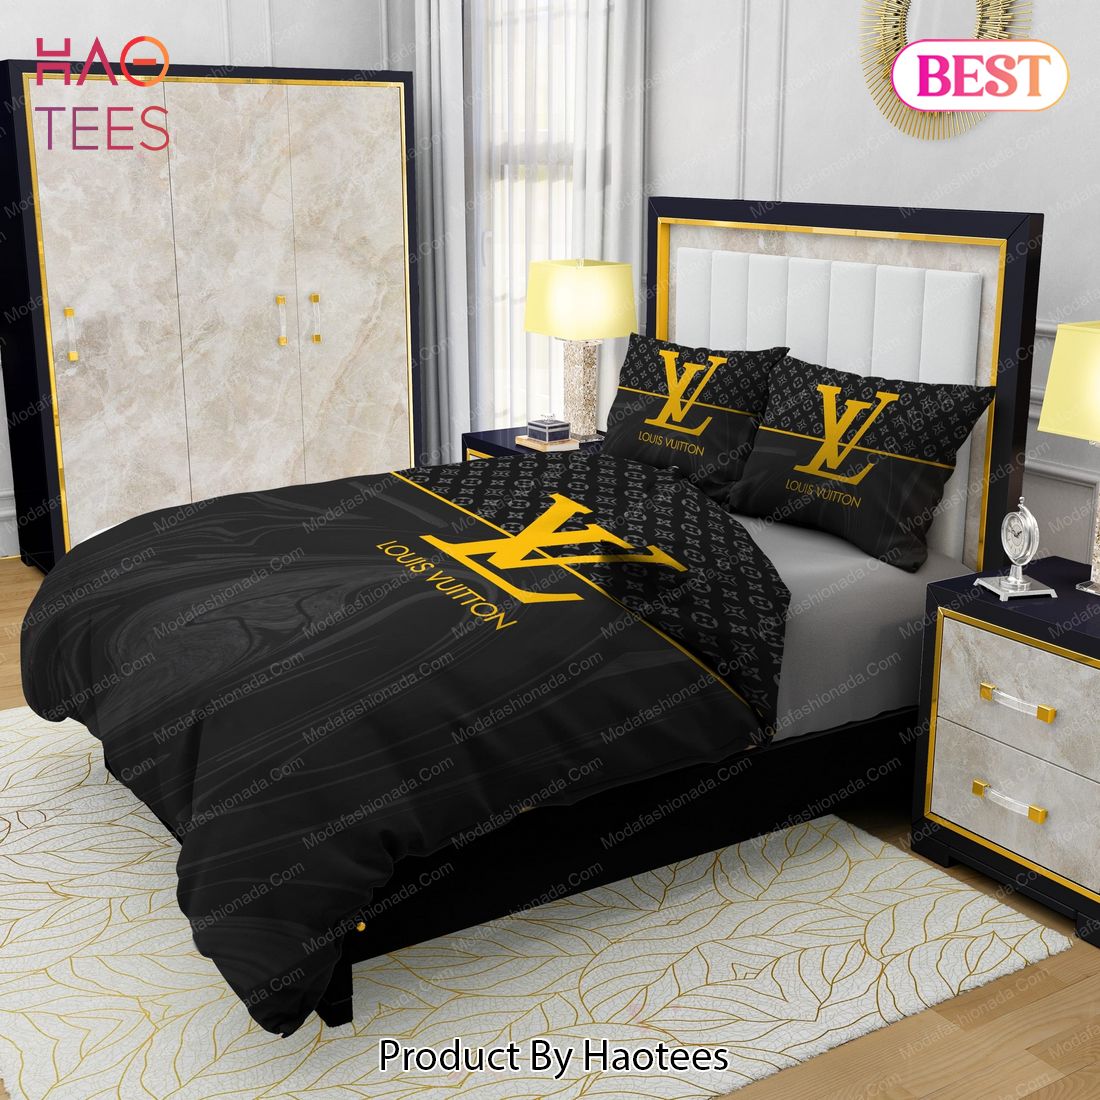 Black Veinstone And Gold Louis Vuitton Bedding Sets Bed Sets